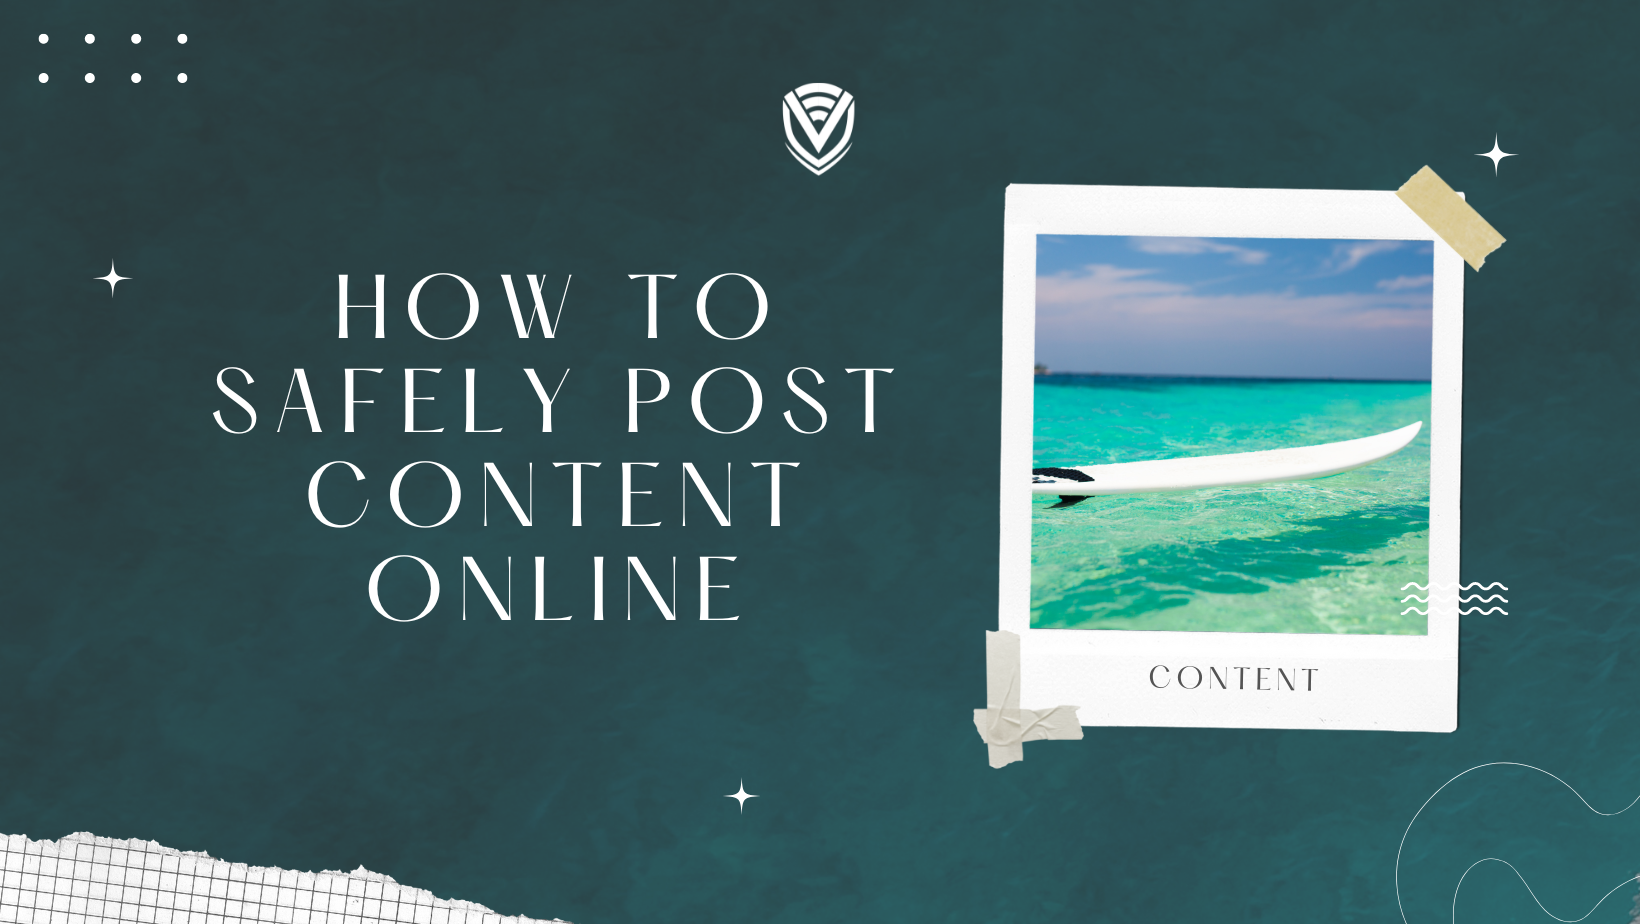 How To Safely Post Content Online